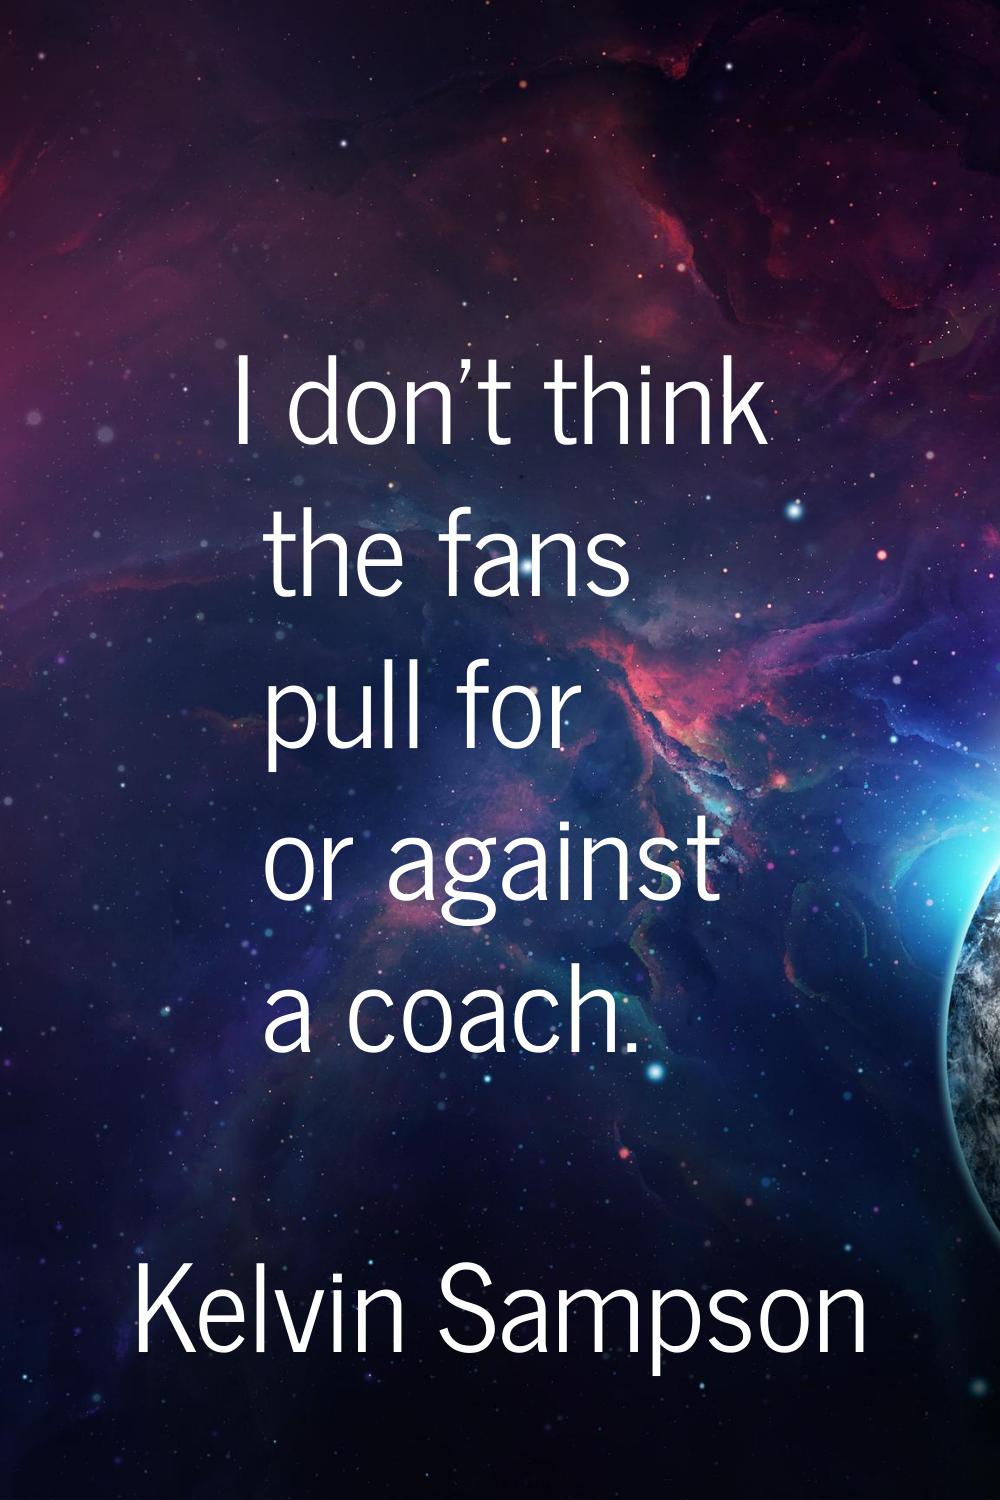 I don't think the fans pull for or against a coach.